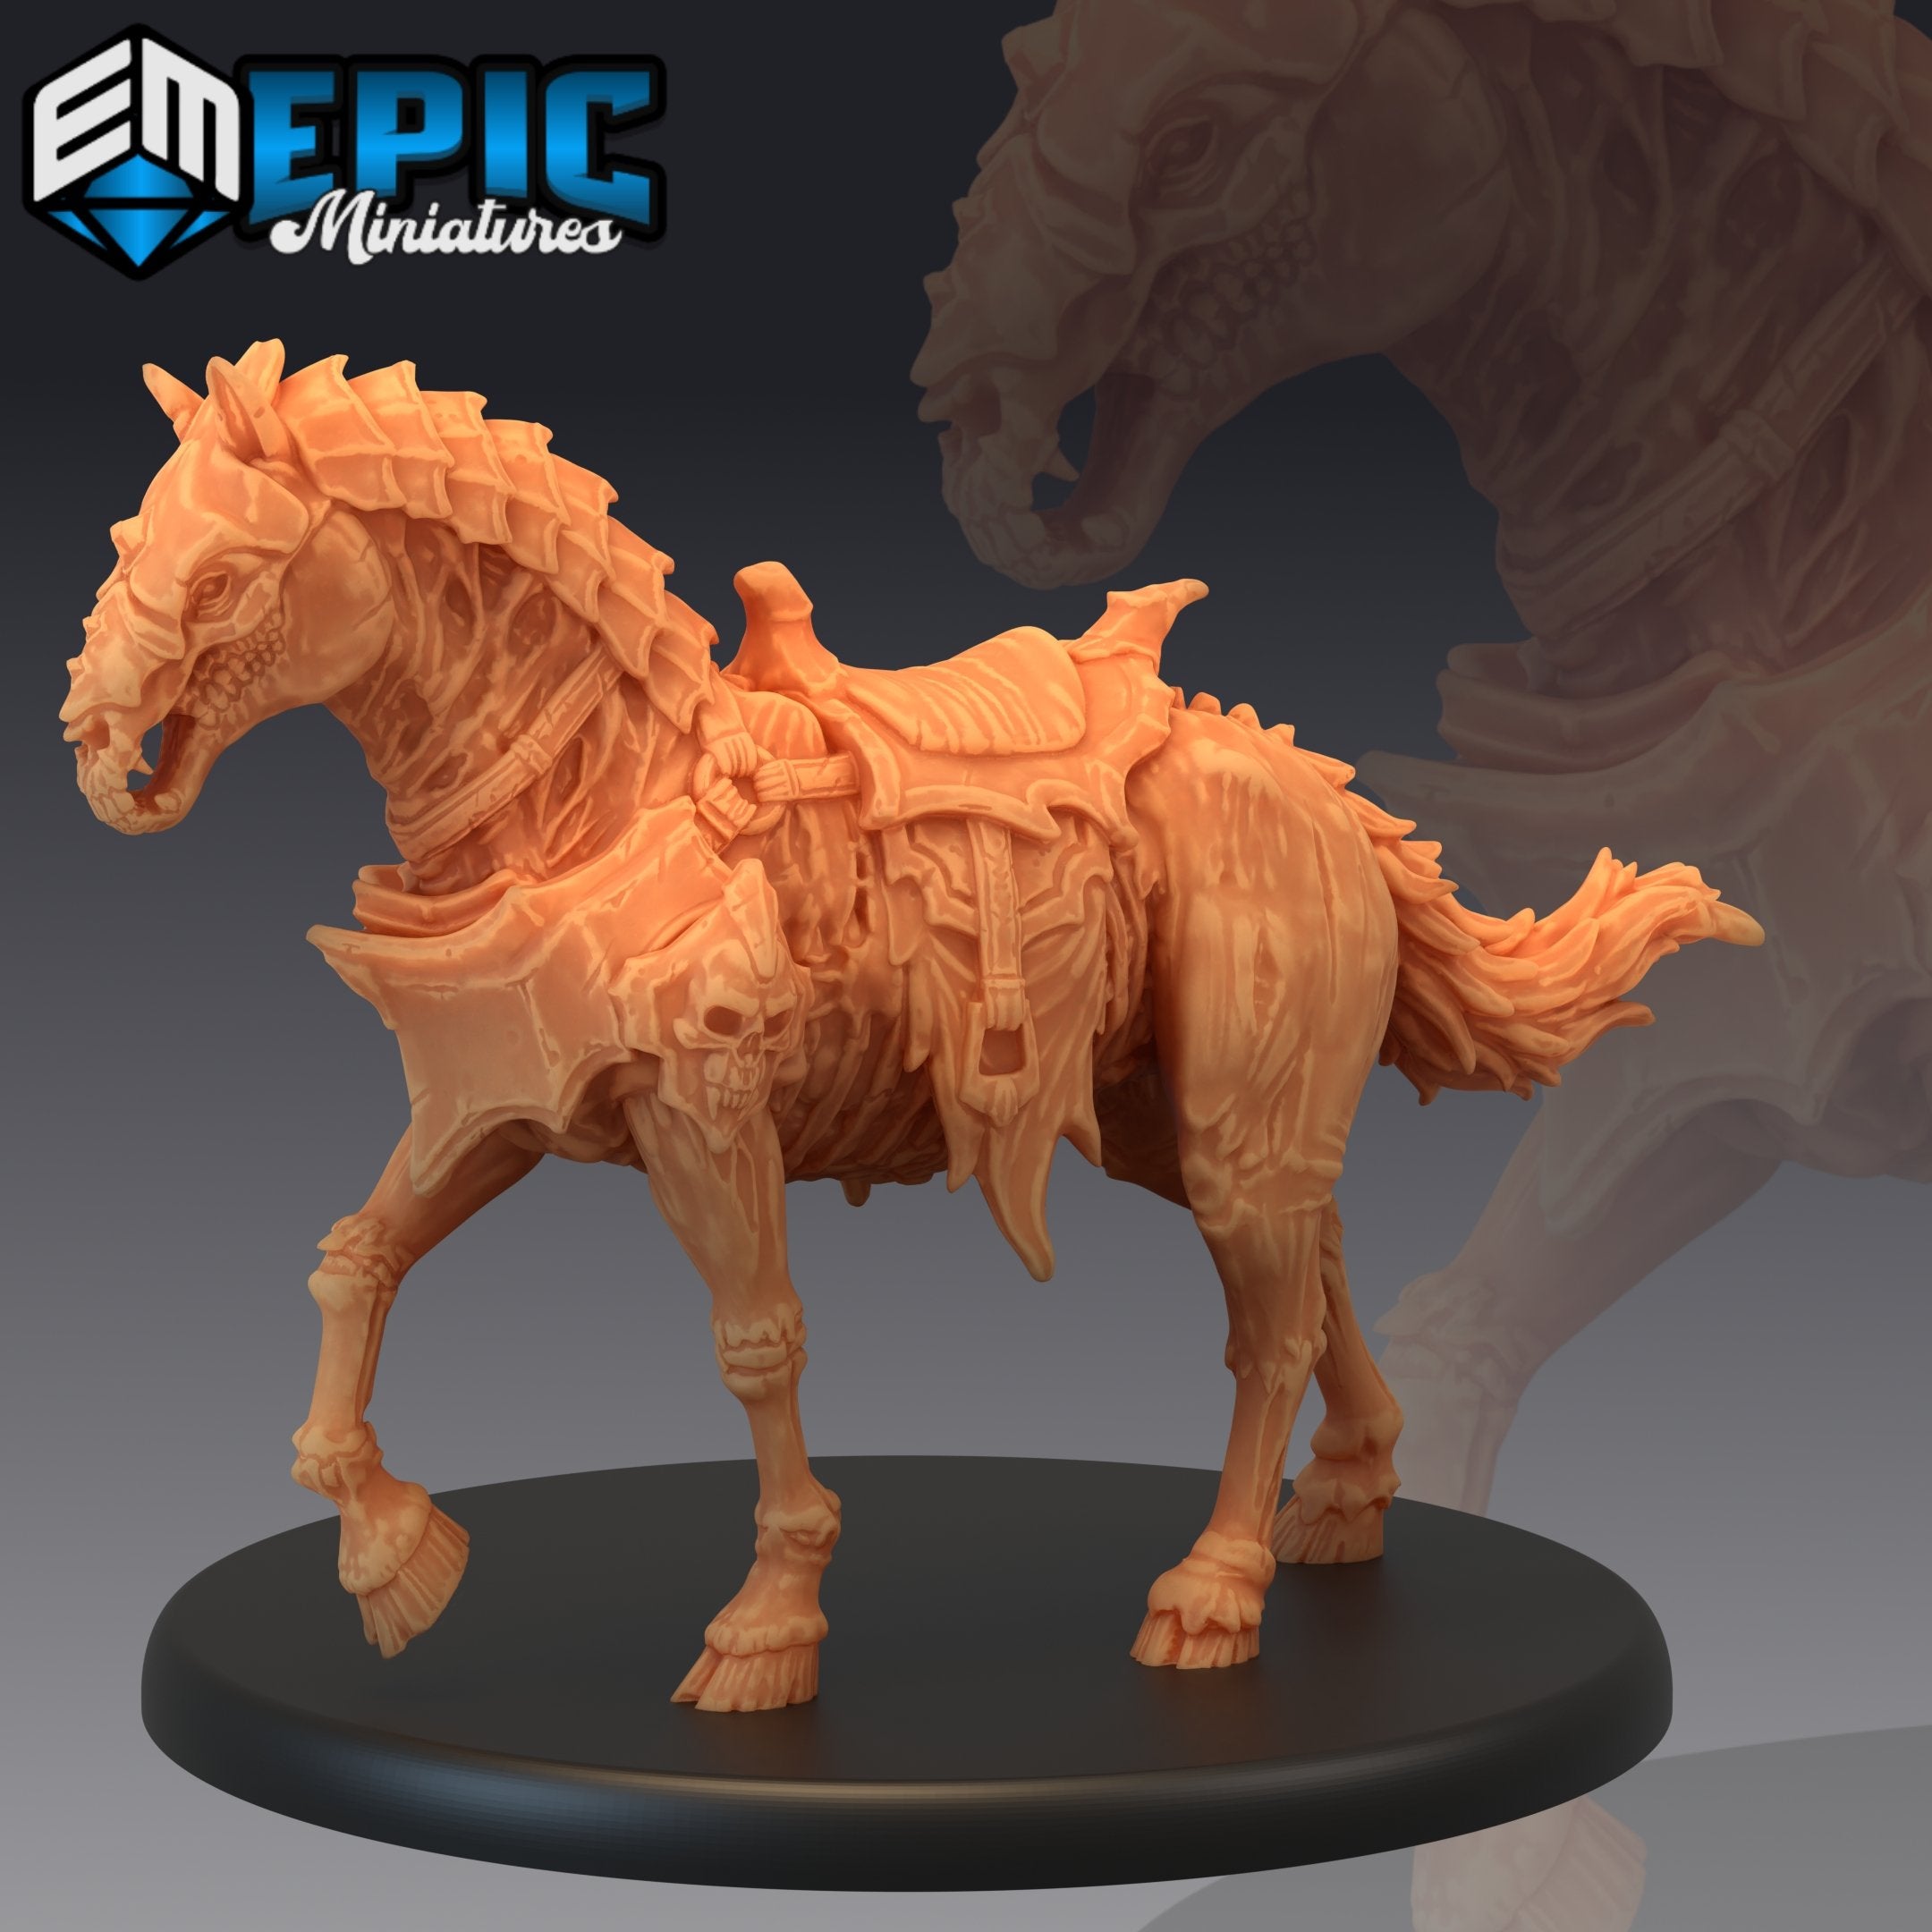 Undead Horse - The Printable Dragon